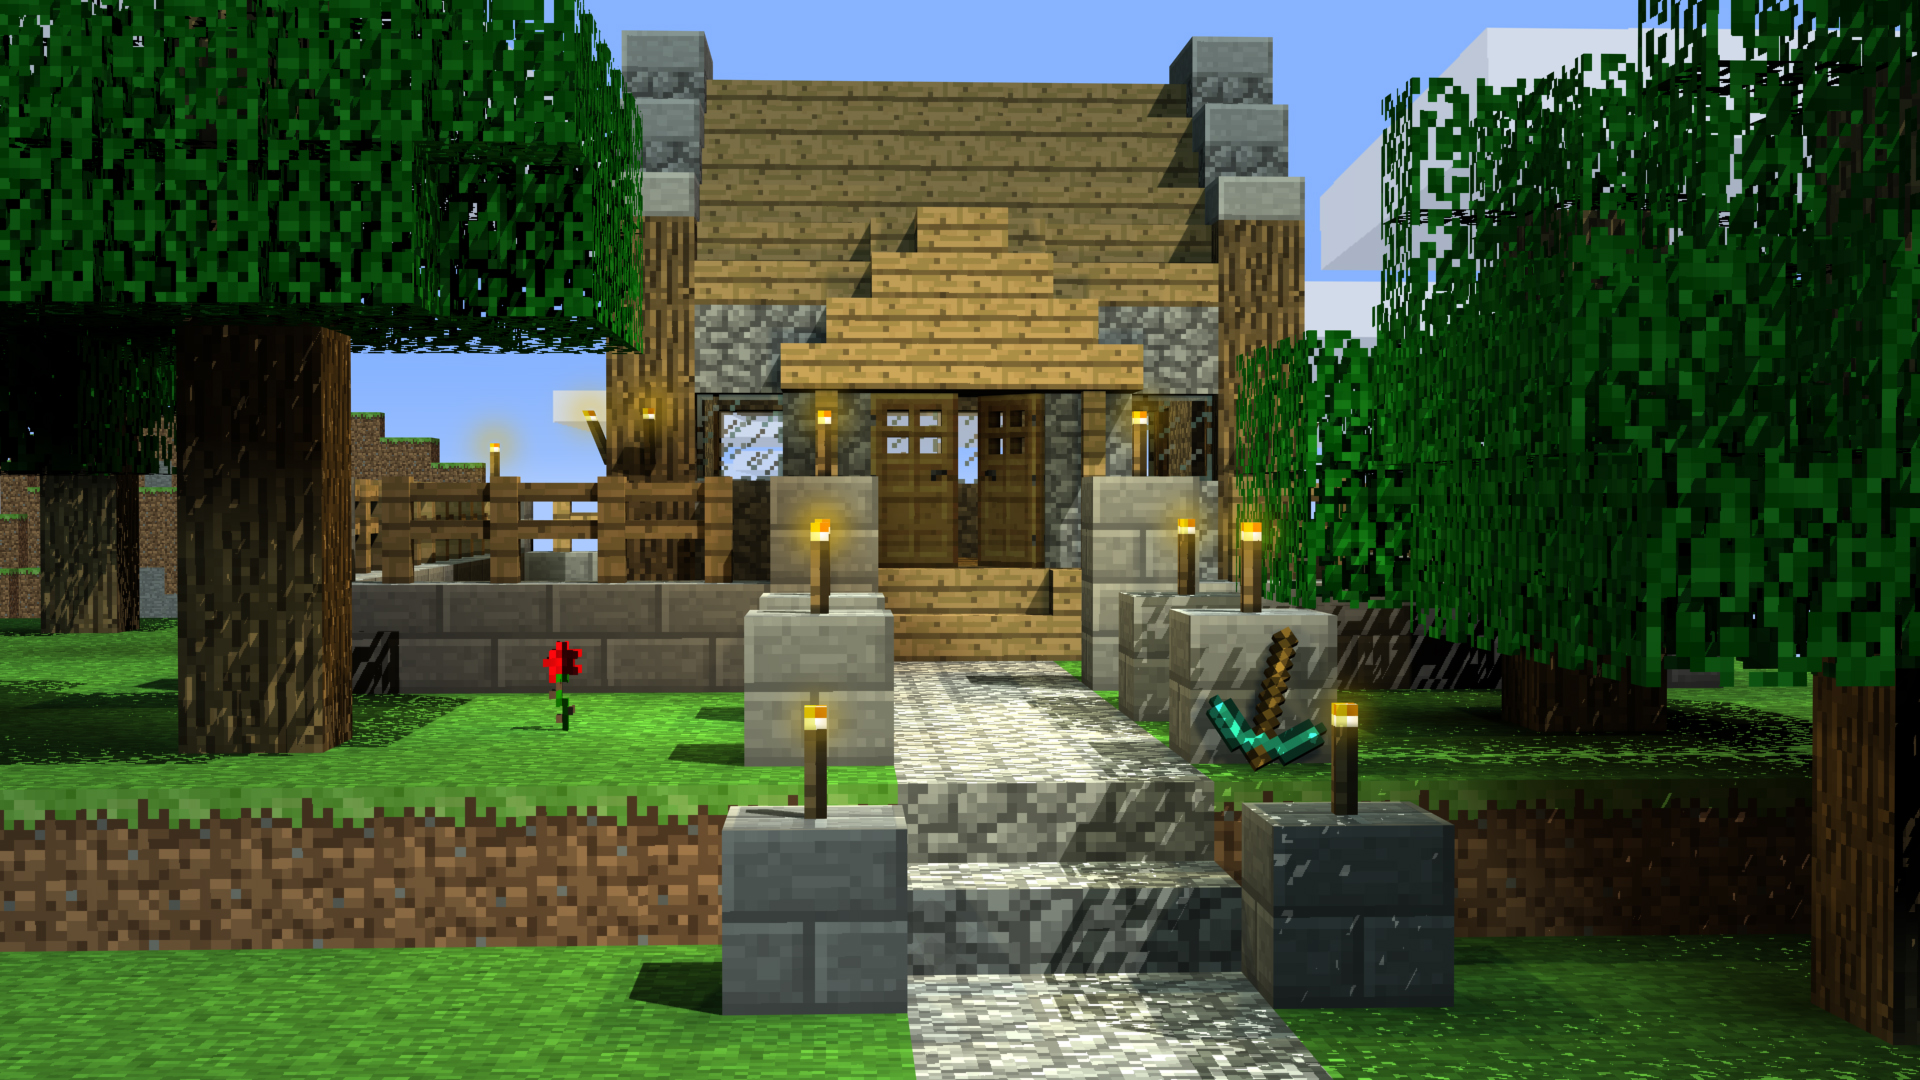 Free Download Minecraft Cozy Cottage Wallpaper Of Cozy Cottage